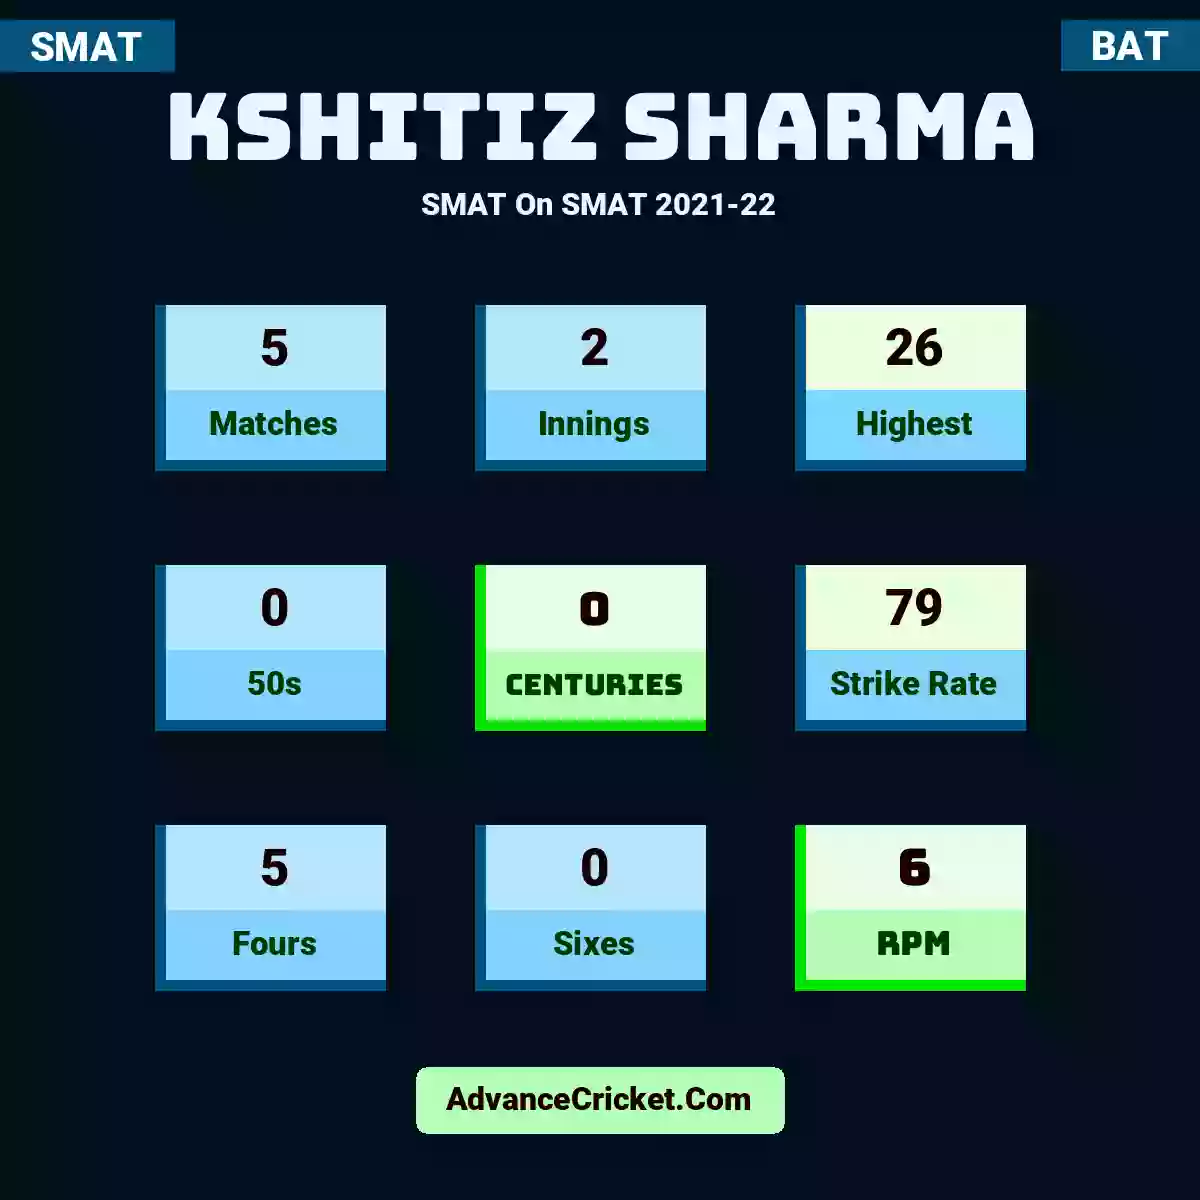 Kshitiz Sharma SMAT  On SMAT 2021-22, Kshitiz Sharma played 5 matches, scored 26 runs as highest, 0 half-centuries, and 0 centuries, with a strike rate of 79. K.Sharma hit 5 fours and 0 sixes, with an RPM of 6.